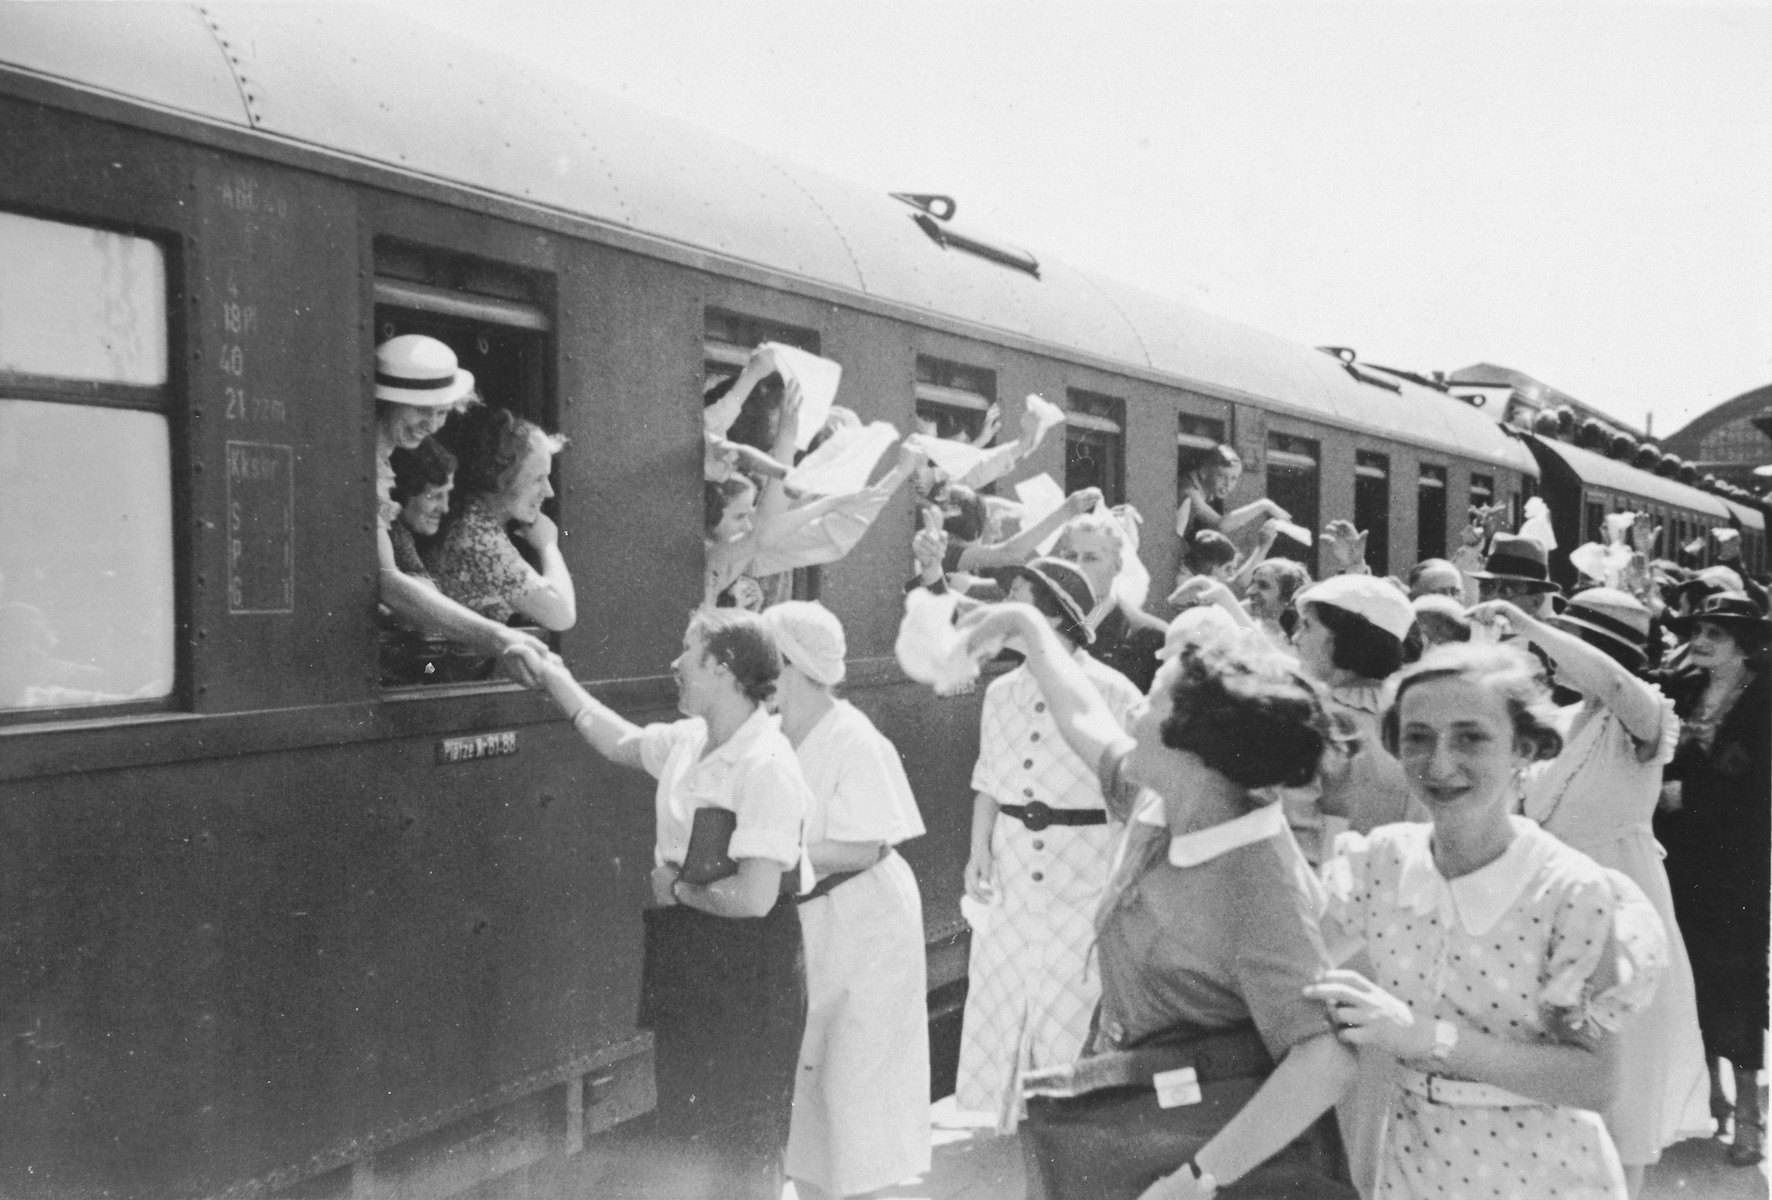 Jewish children from Germany depart by train from a Kinderlager [children's recreational summer camp] in Horserod, Denmark. 
 
In 1935-36 Norbert Wollheim was involved in organizing groups of German Jewish youth to attend a summer camp in Denmark.